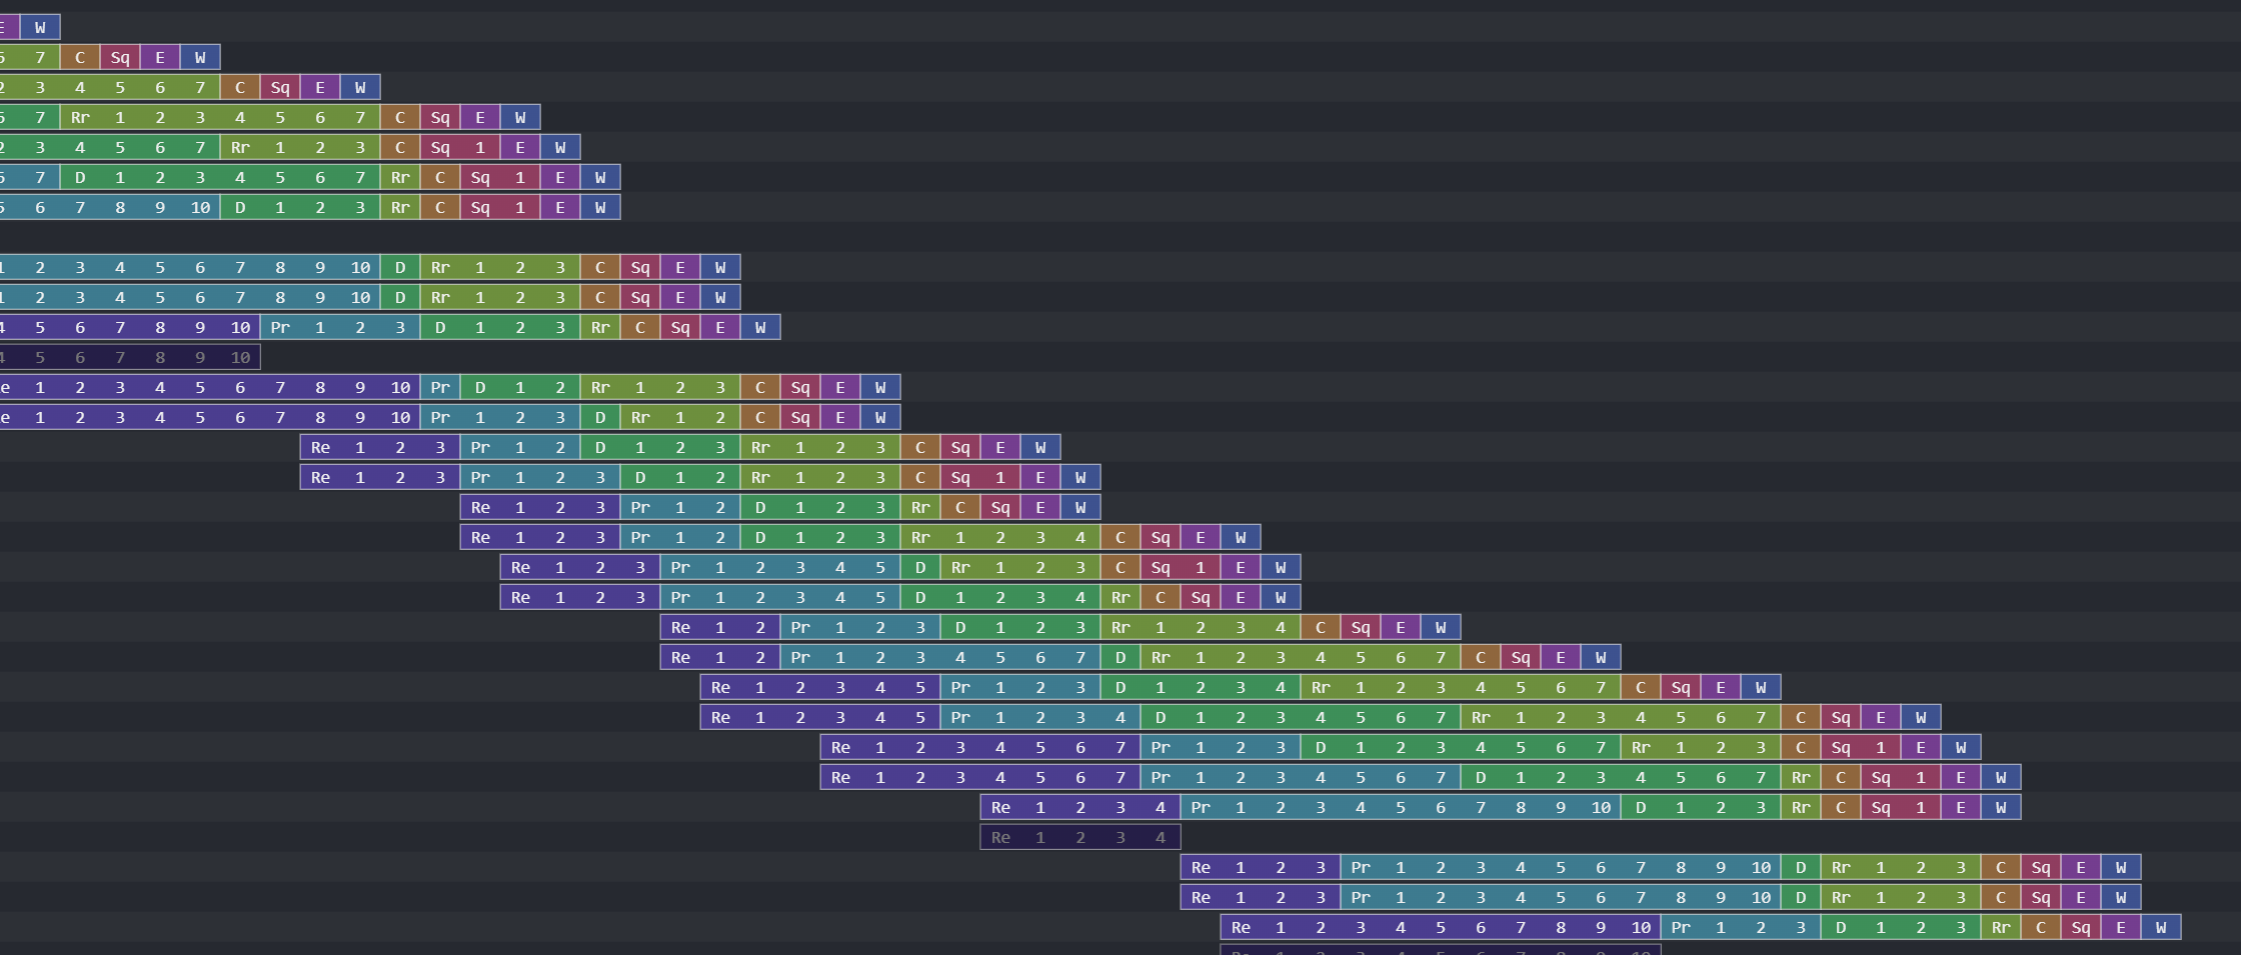 Very colorful pipeline visualization, but very stretched out. You can almost disregard every stage before C.